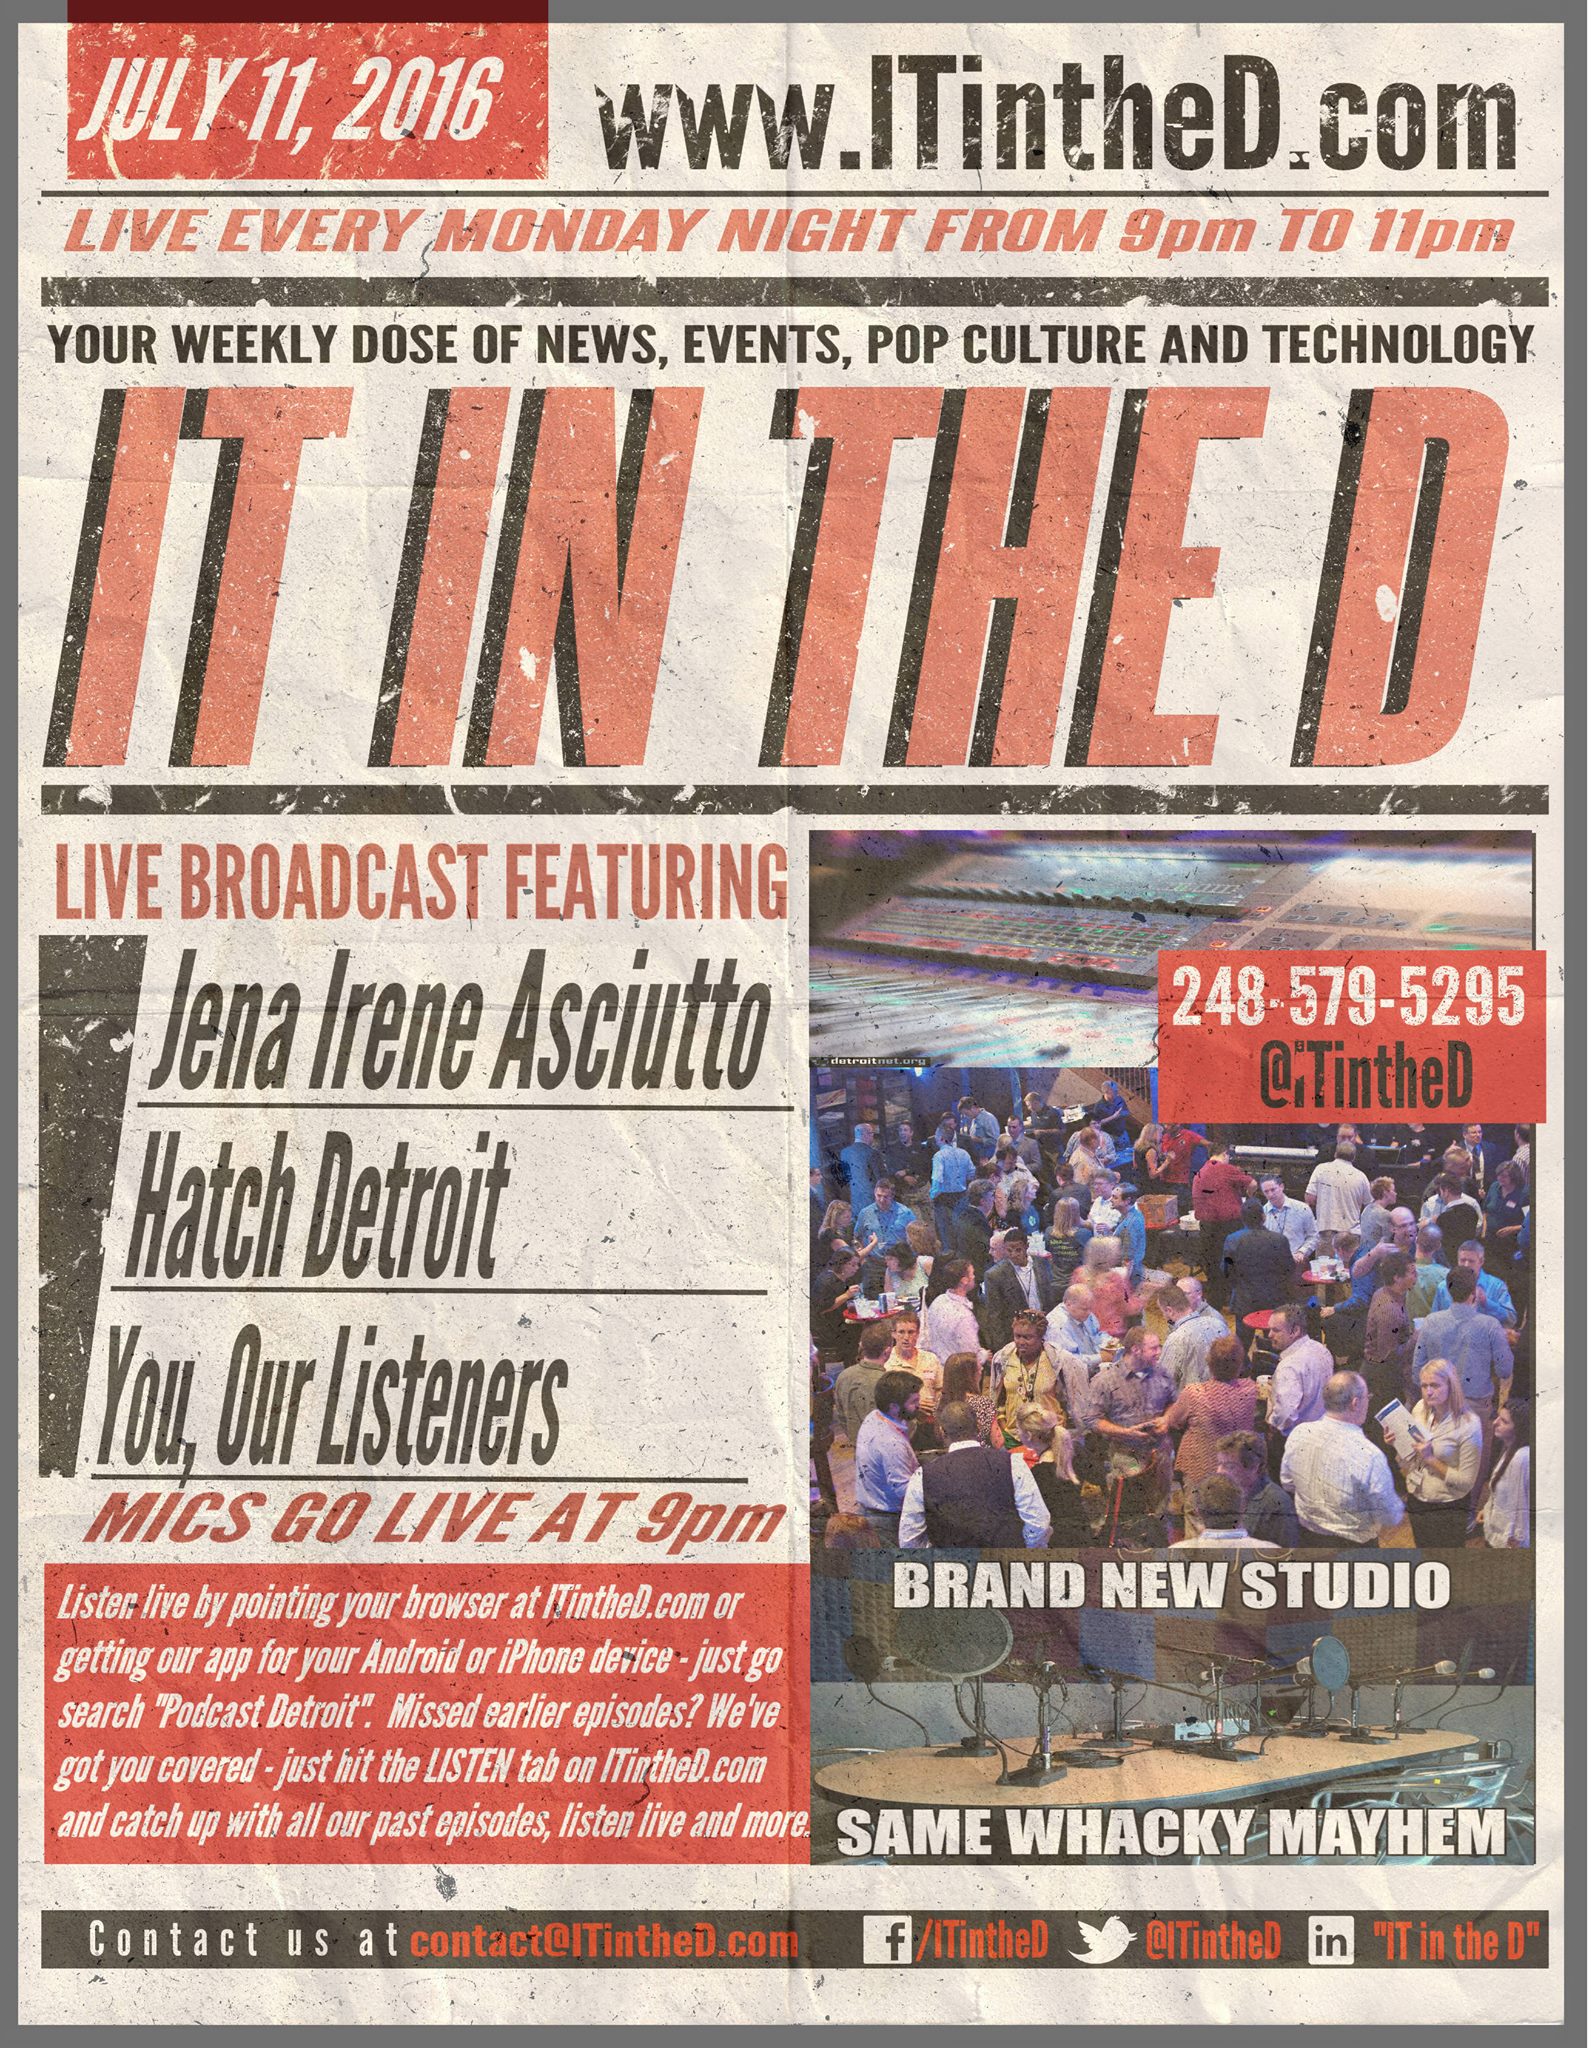 Hatch Detroit, Jena Irene Asciutto (American Idol) In-Studio Tonight, Yesterday’s Adventure, Event Updates and More for 7/11/2016